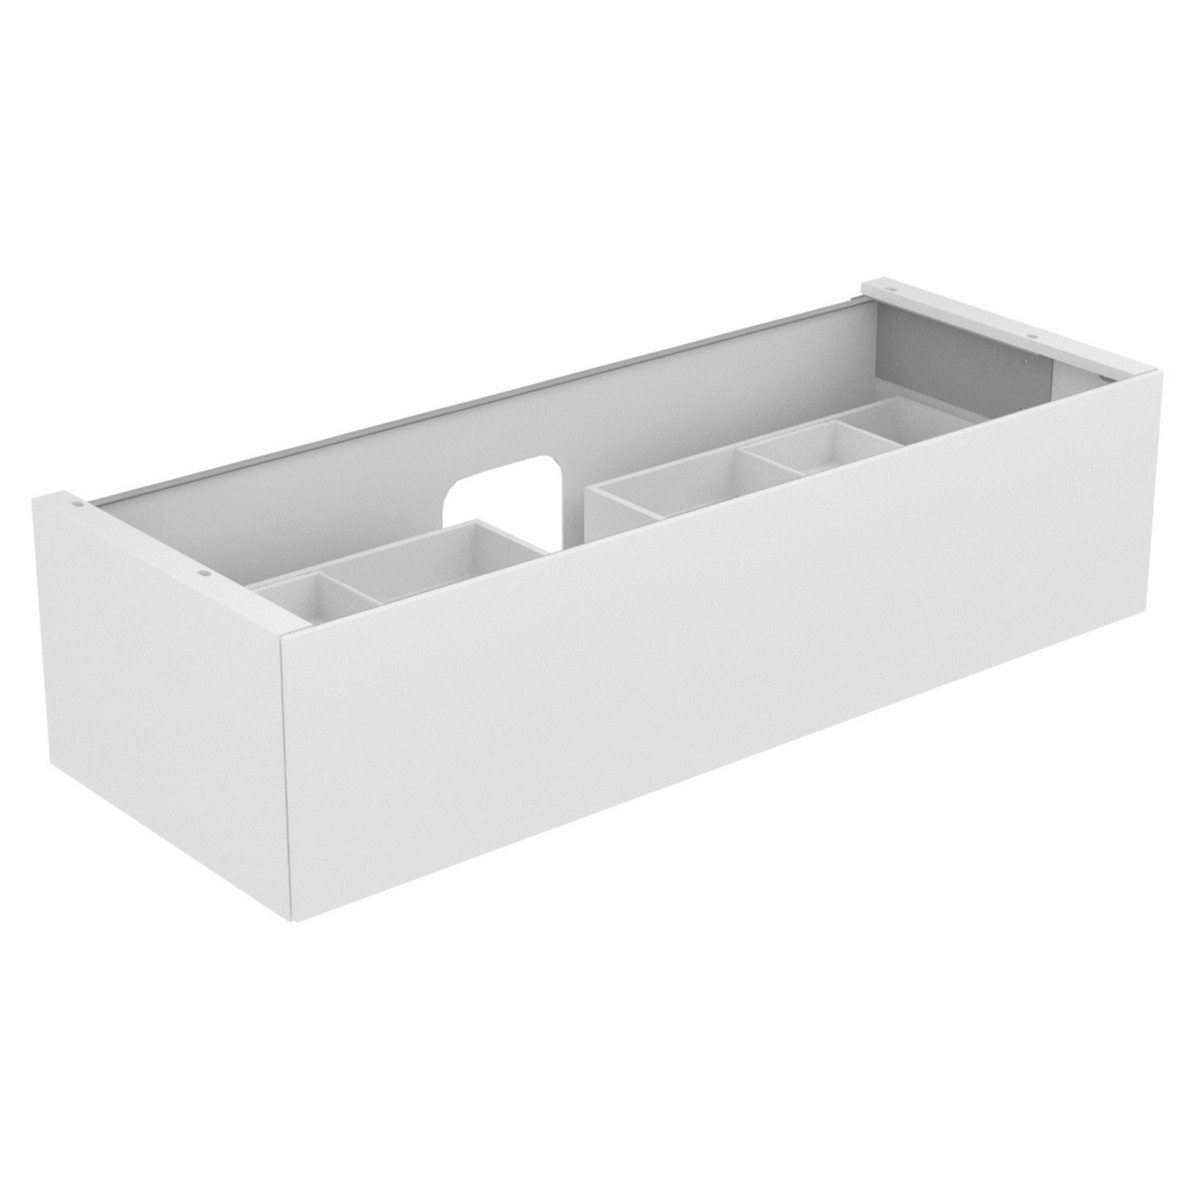 KEUCO 3136100 EDITION 11 55 1/8 INCH 1-DRAWER WALL MOUNTED SINGLE SINK BATHROOM VANITY CABINET ONLY